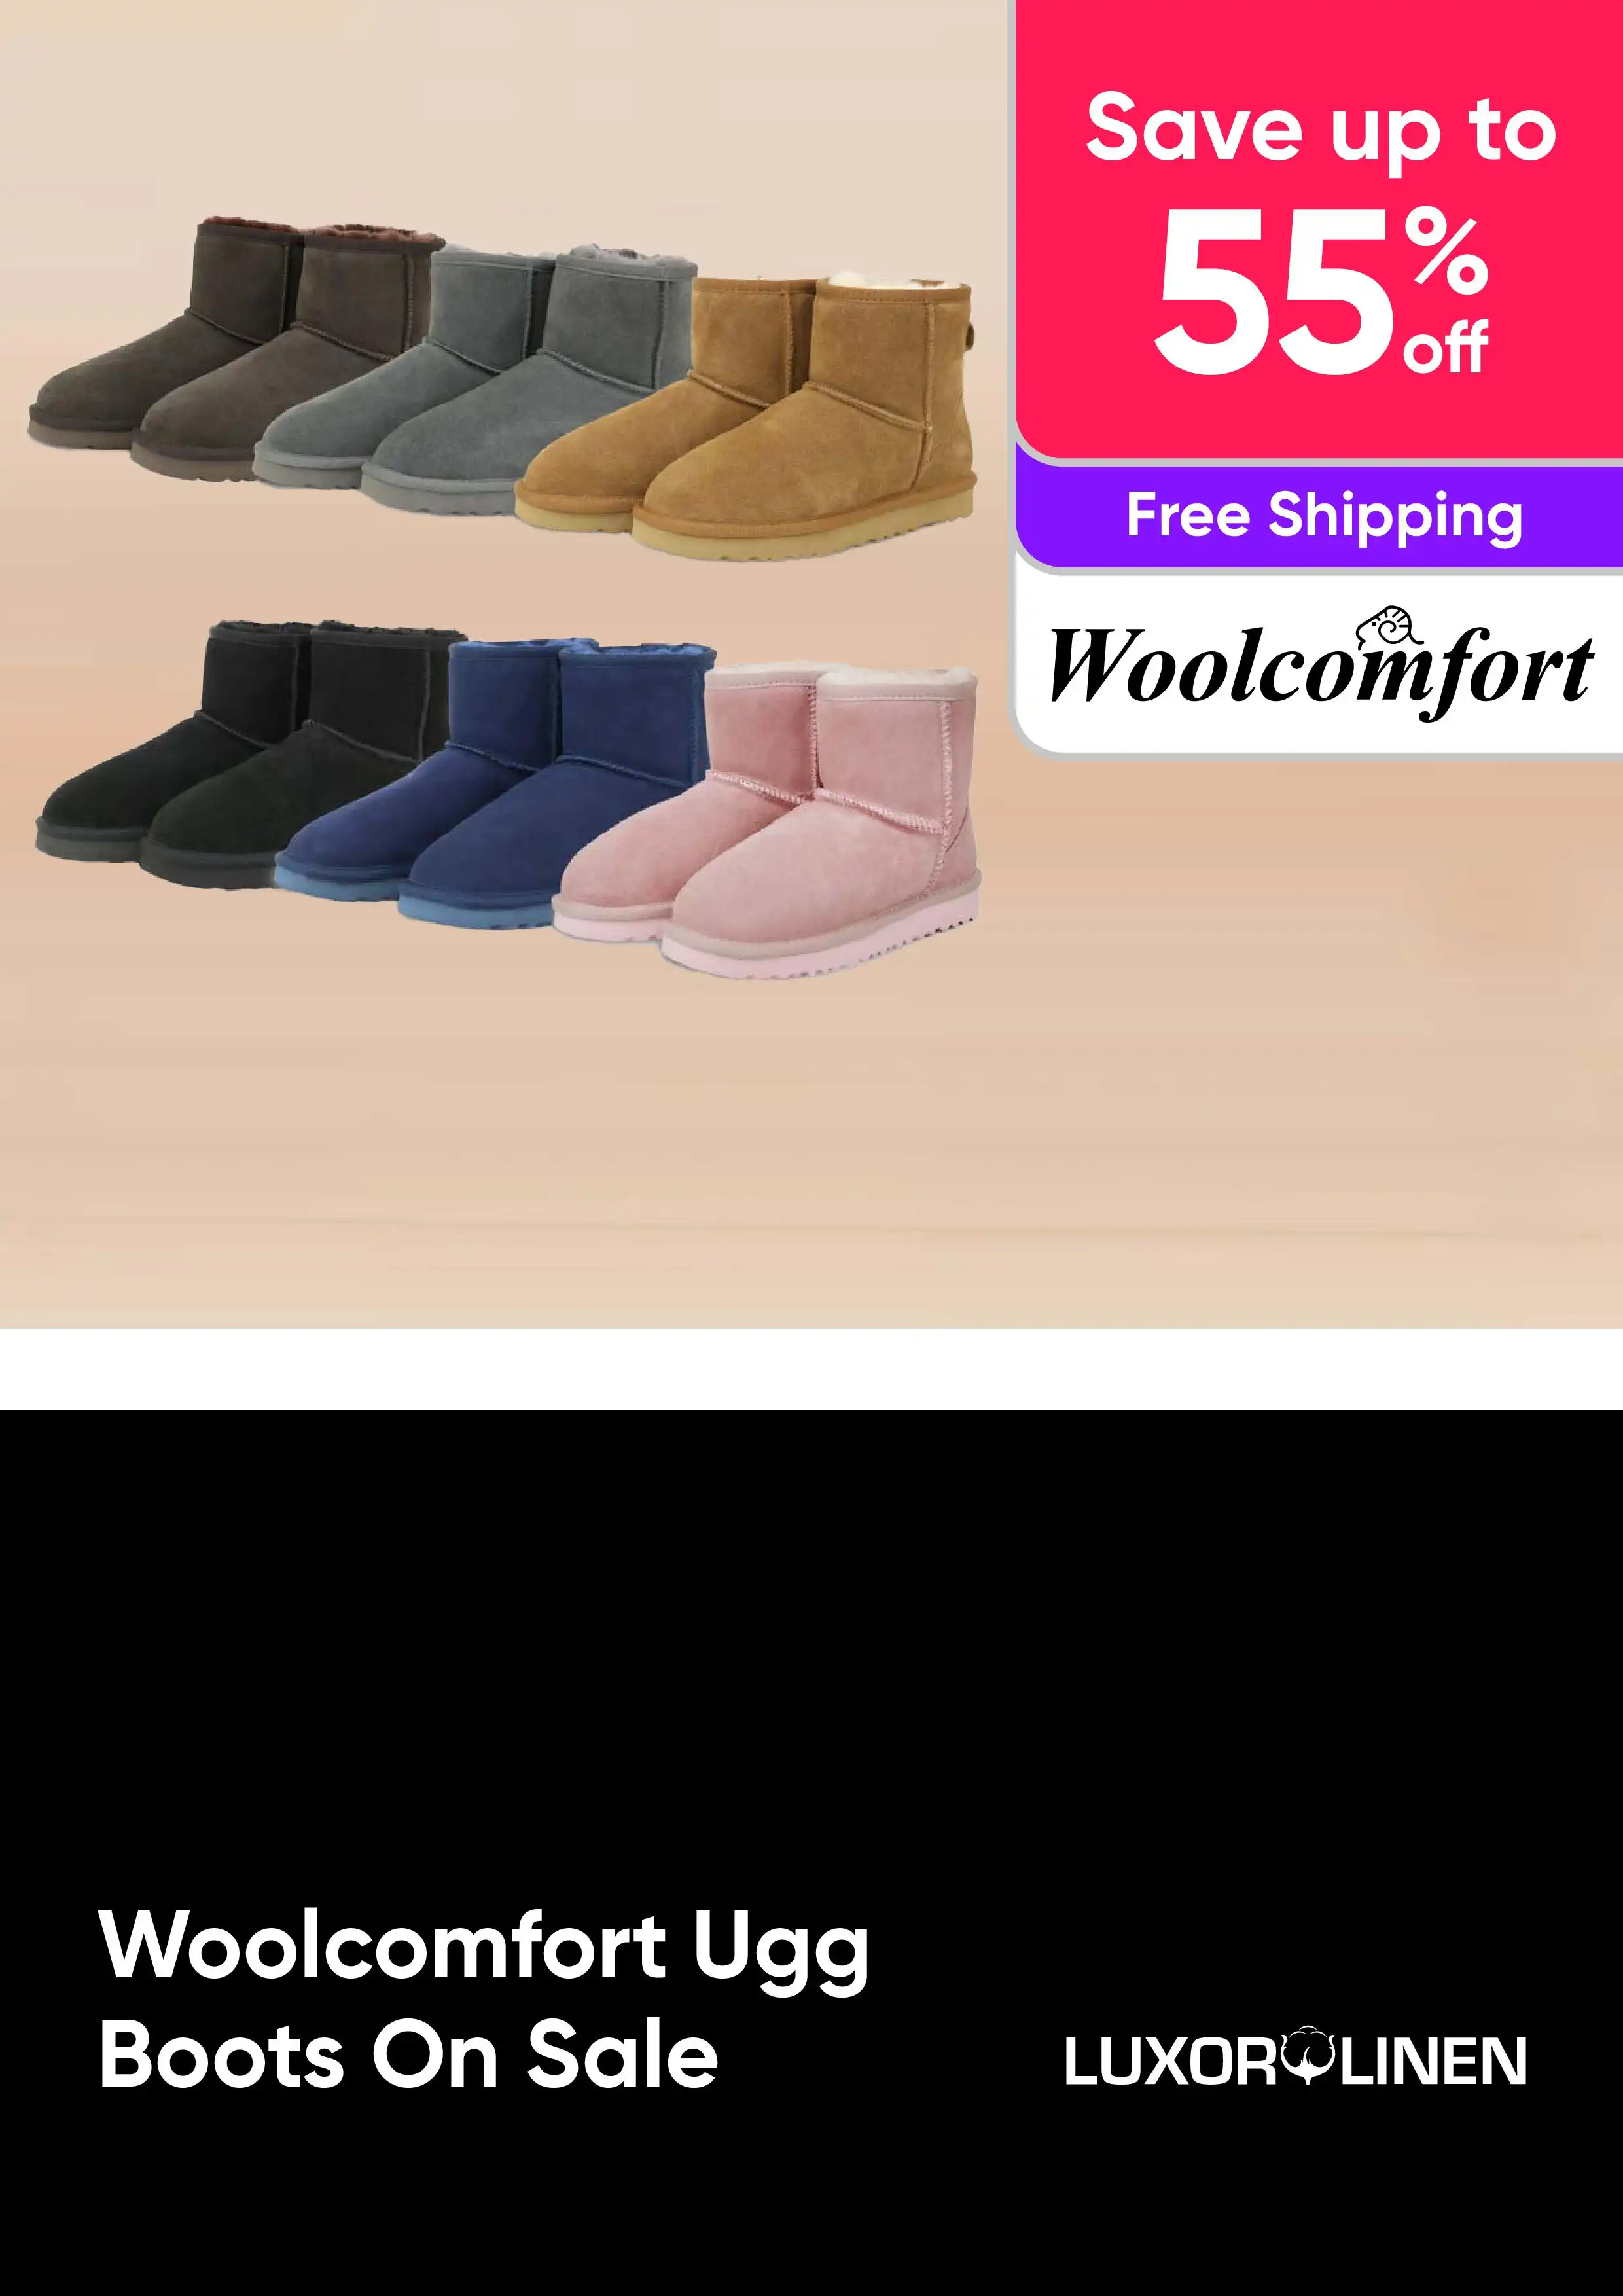 Woolcomfort Ugg Boots On Sale - Save Up to 55% On a Range of Designs